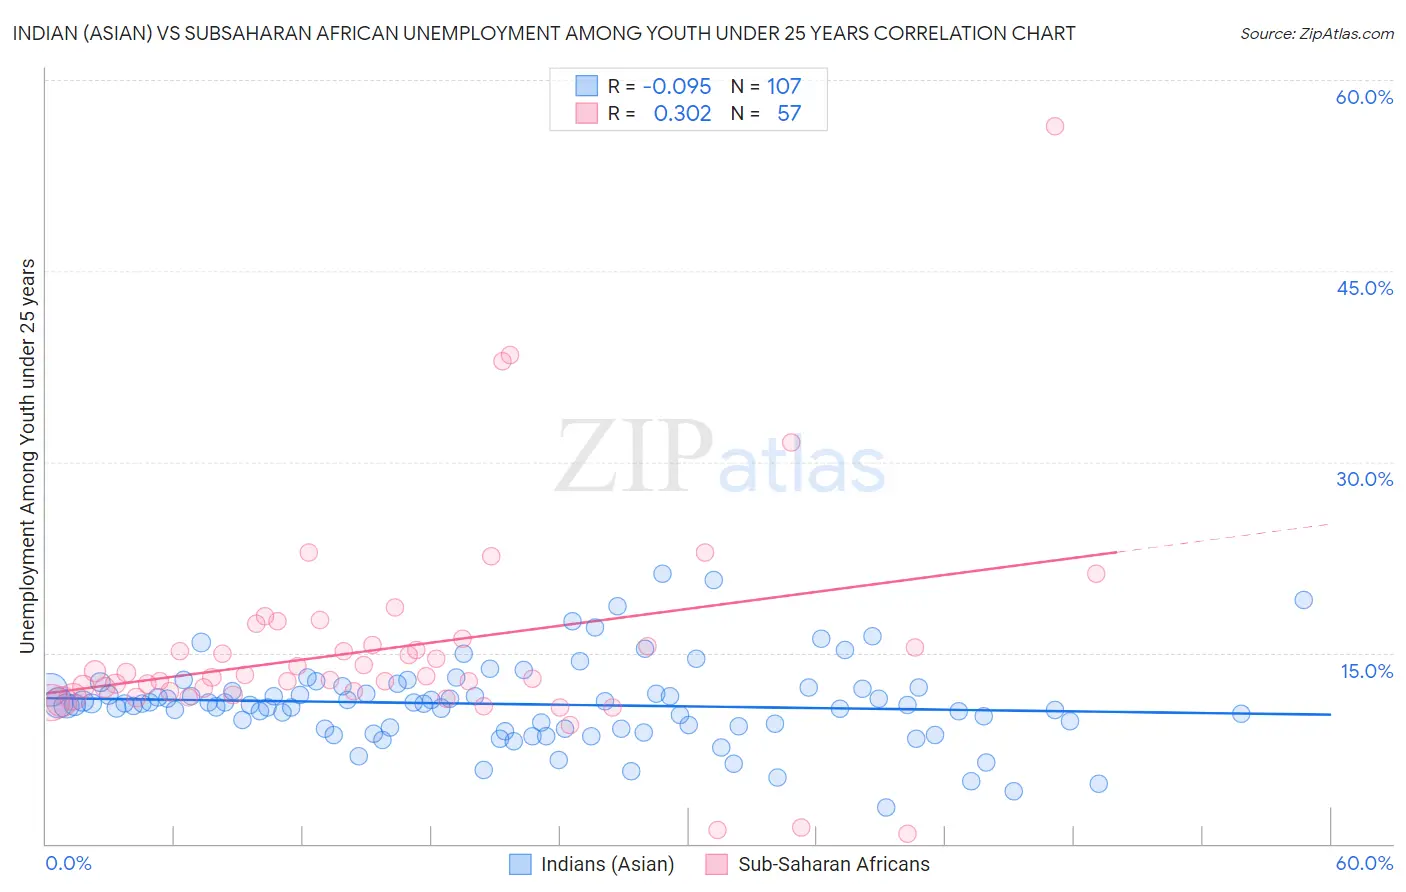 Indian (Asian) vs Subsaharan African Unemployment Among Youth under 25 years